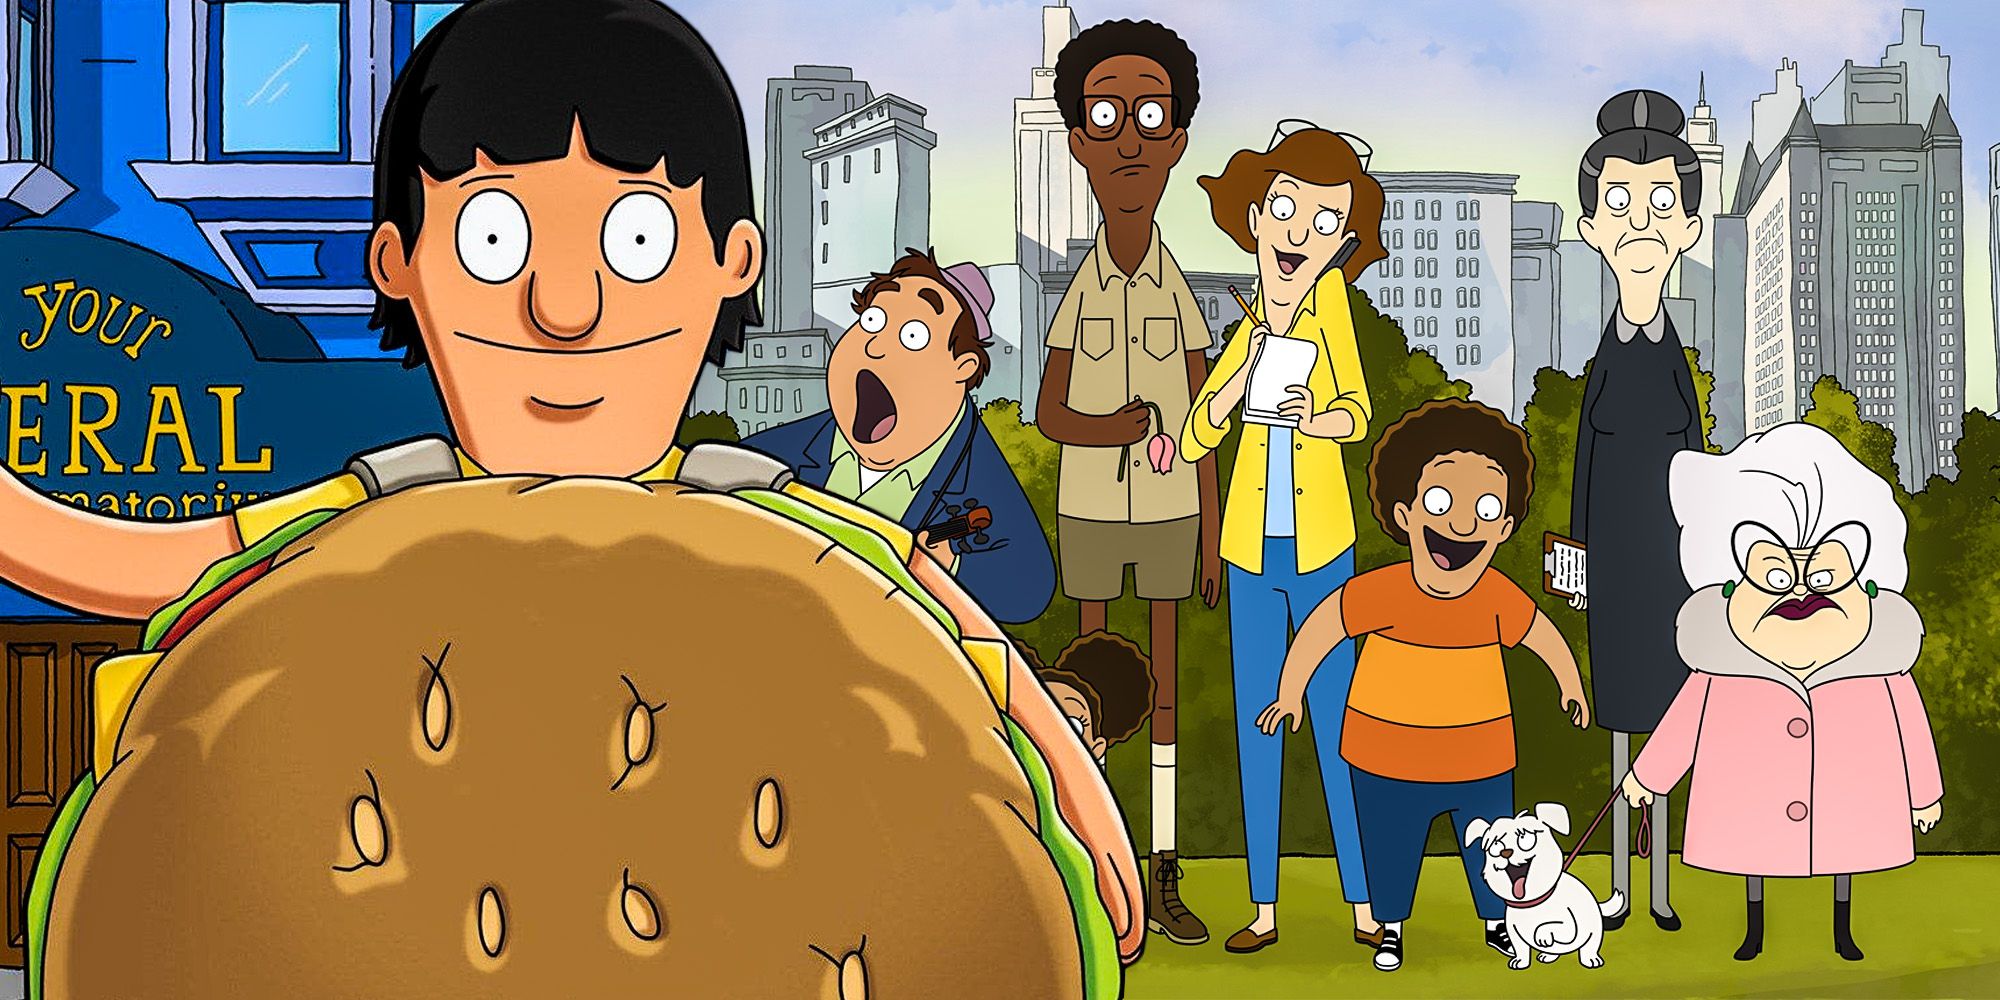 Bobs Burgers Gene related to Central Park